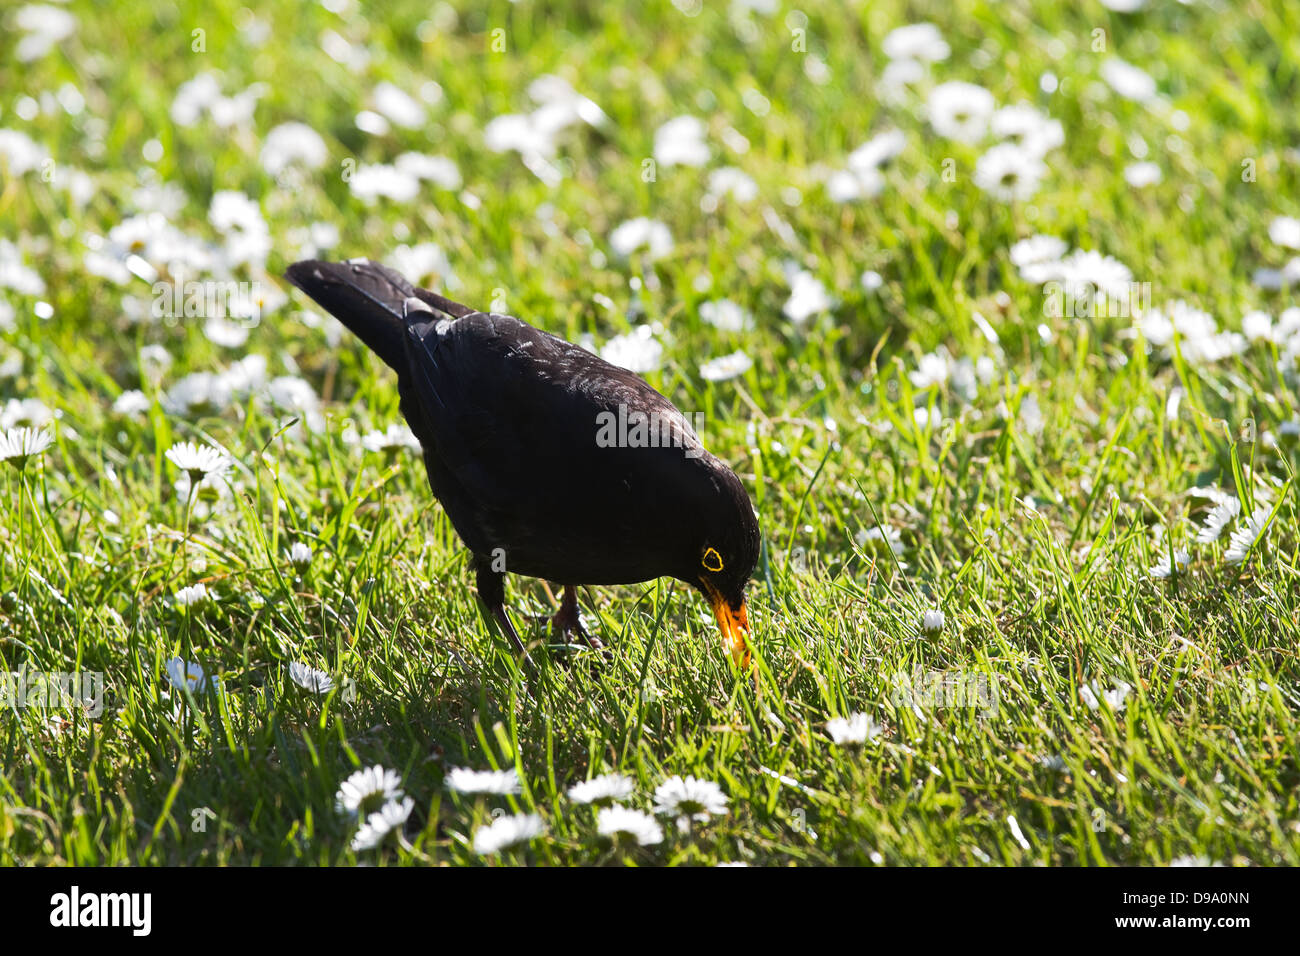 Male Blackbird searching food to feed nestlings or baby birds on evening in spring Stock Photo